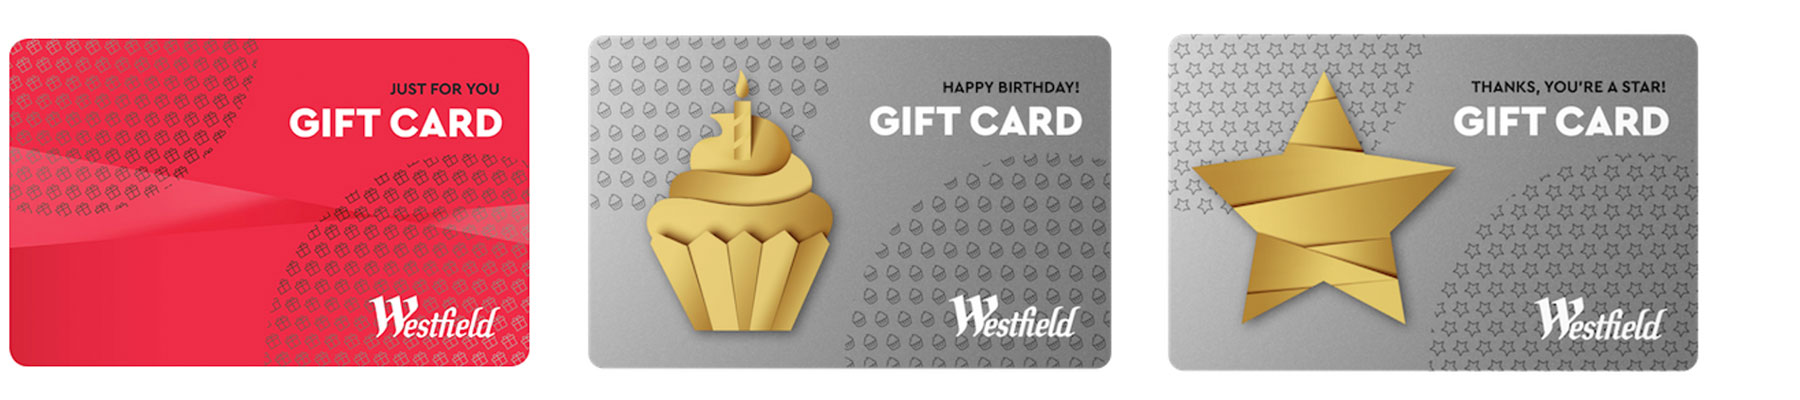 westfield-giftcards